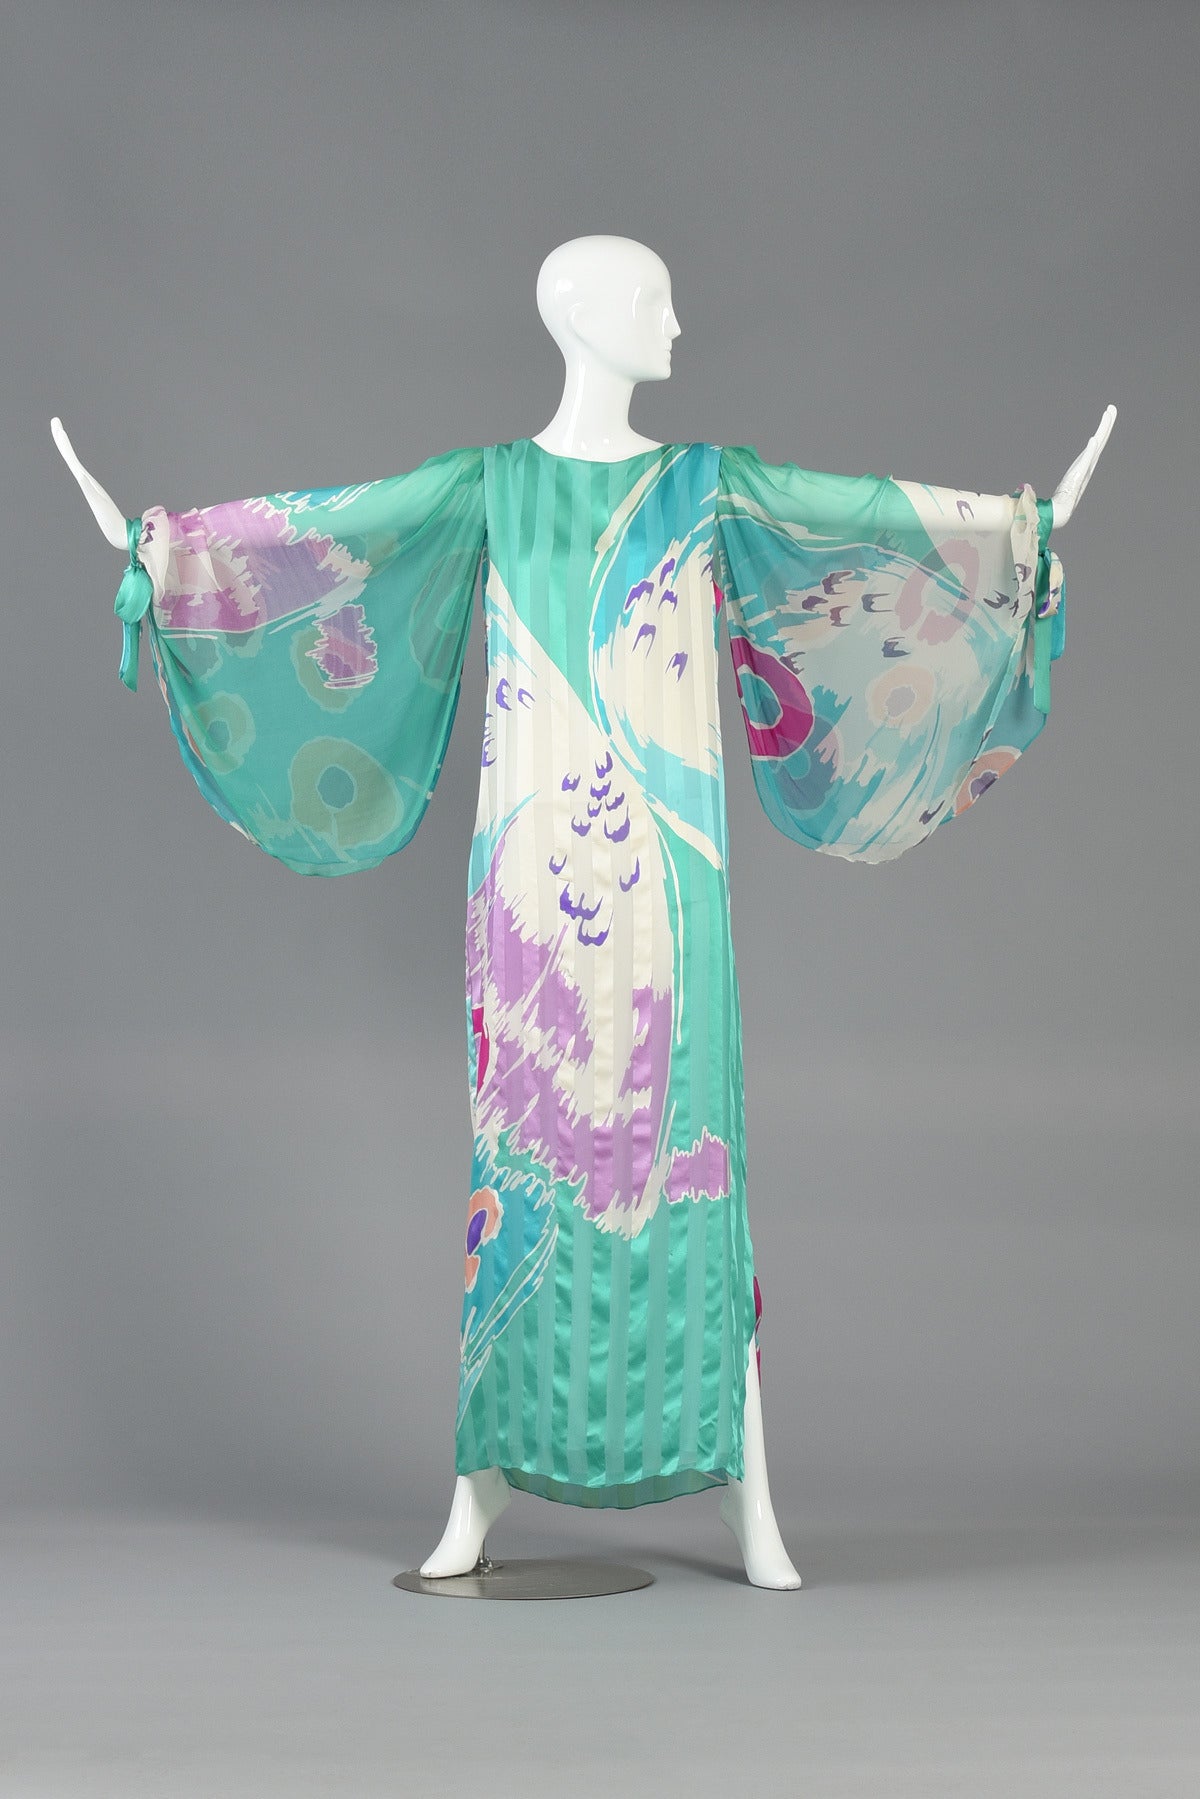 Incredible vintage 70s/80s Hanae Mori silk caftan dress. Beautiful graphic swirled print reminiscent of brushstrokes. Tone on tone striping. MASSIVE draped sleeves with tie detail at wrist. A truly stunning dress!

Very good to excellent vintage